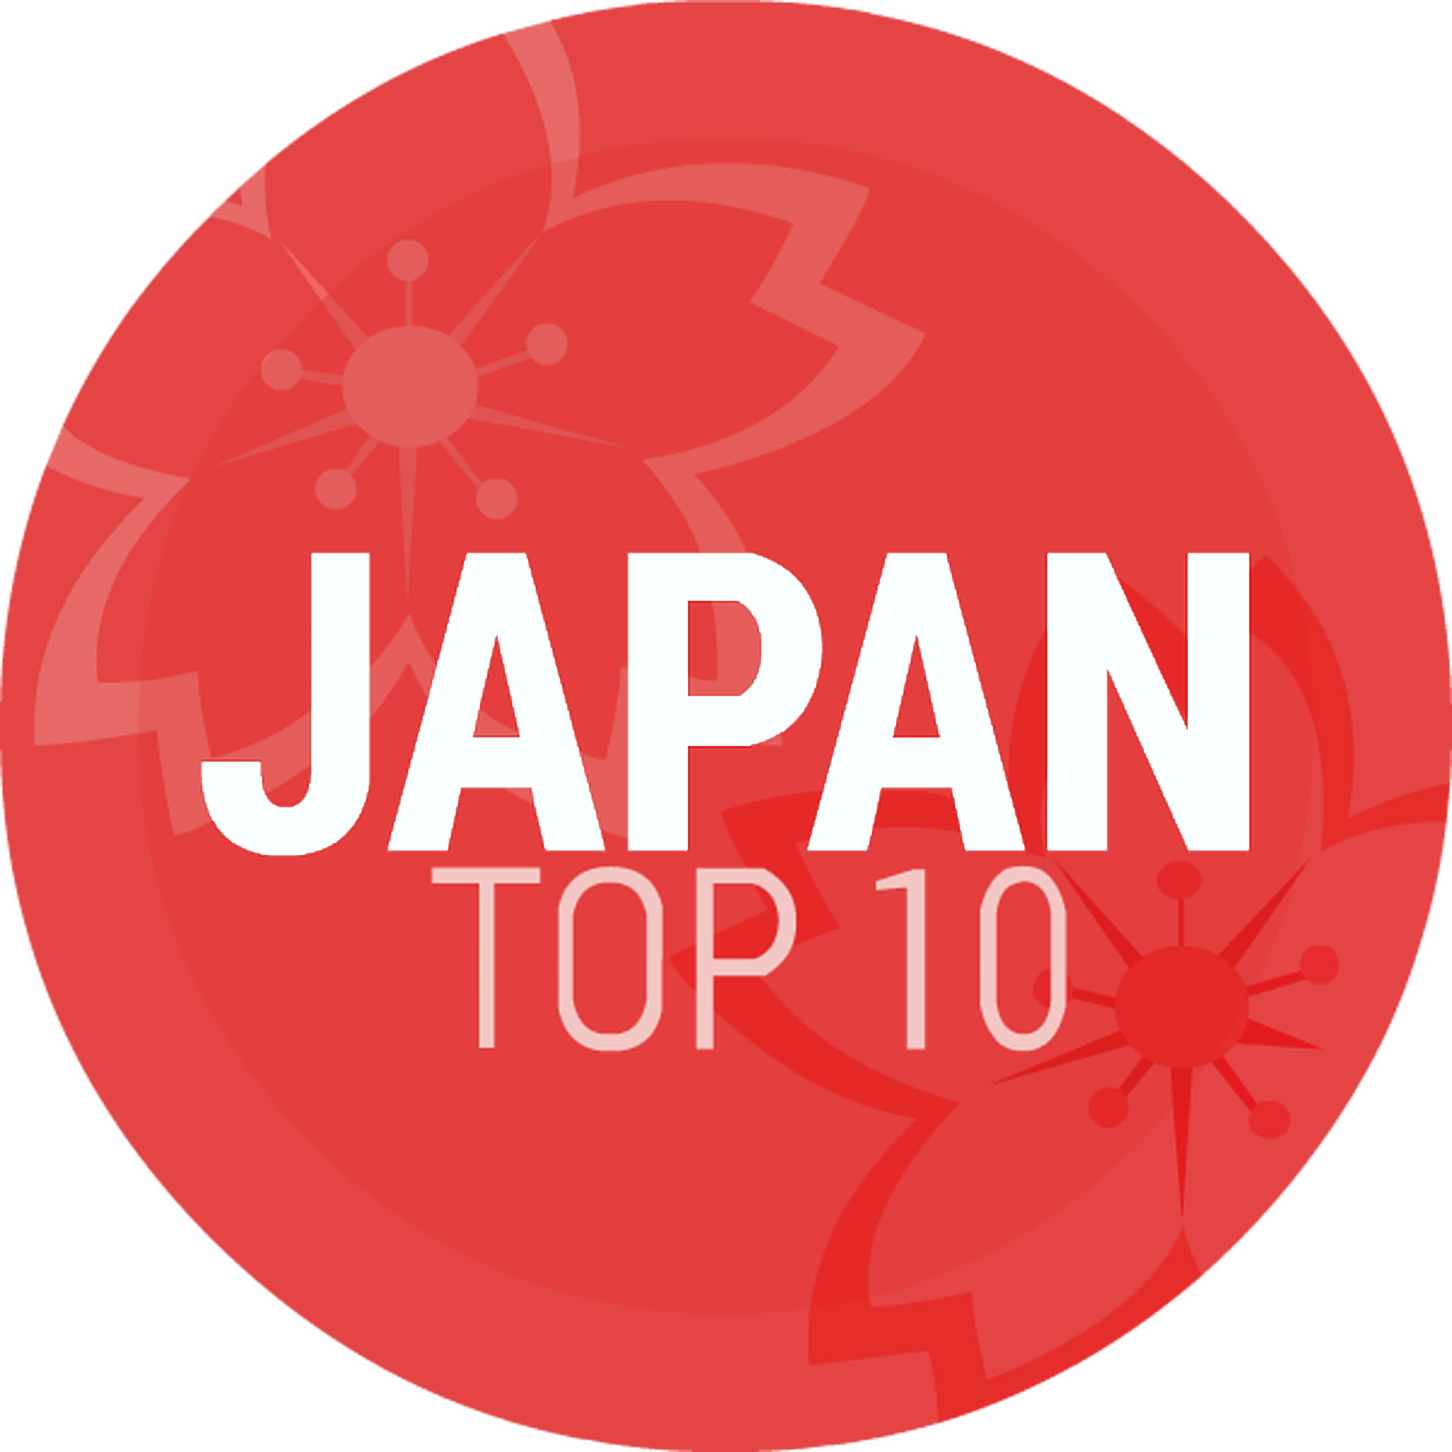 Episode 16: Japan Top 10 Mid/Late September 2013 Countdown